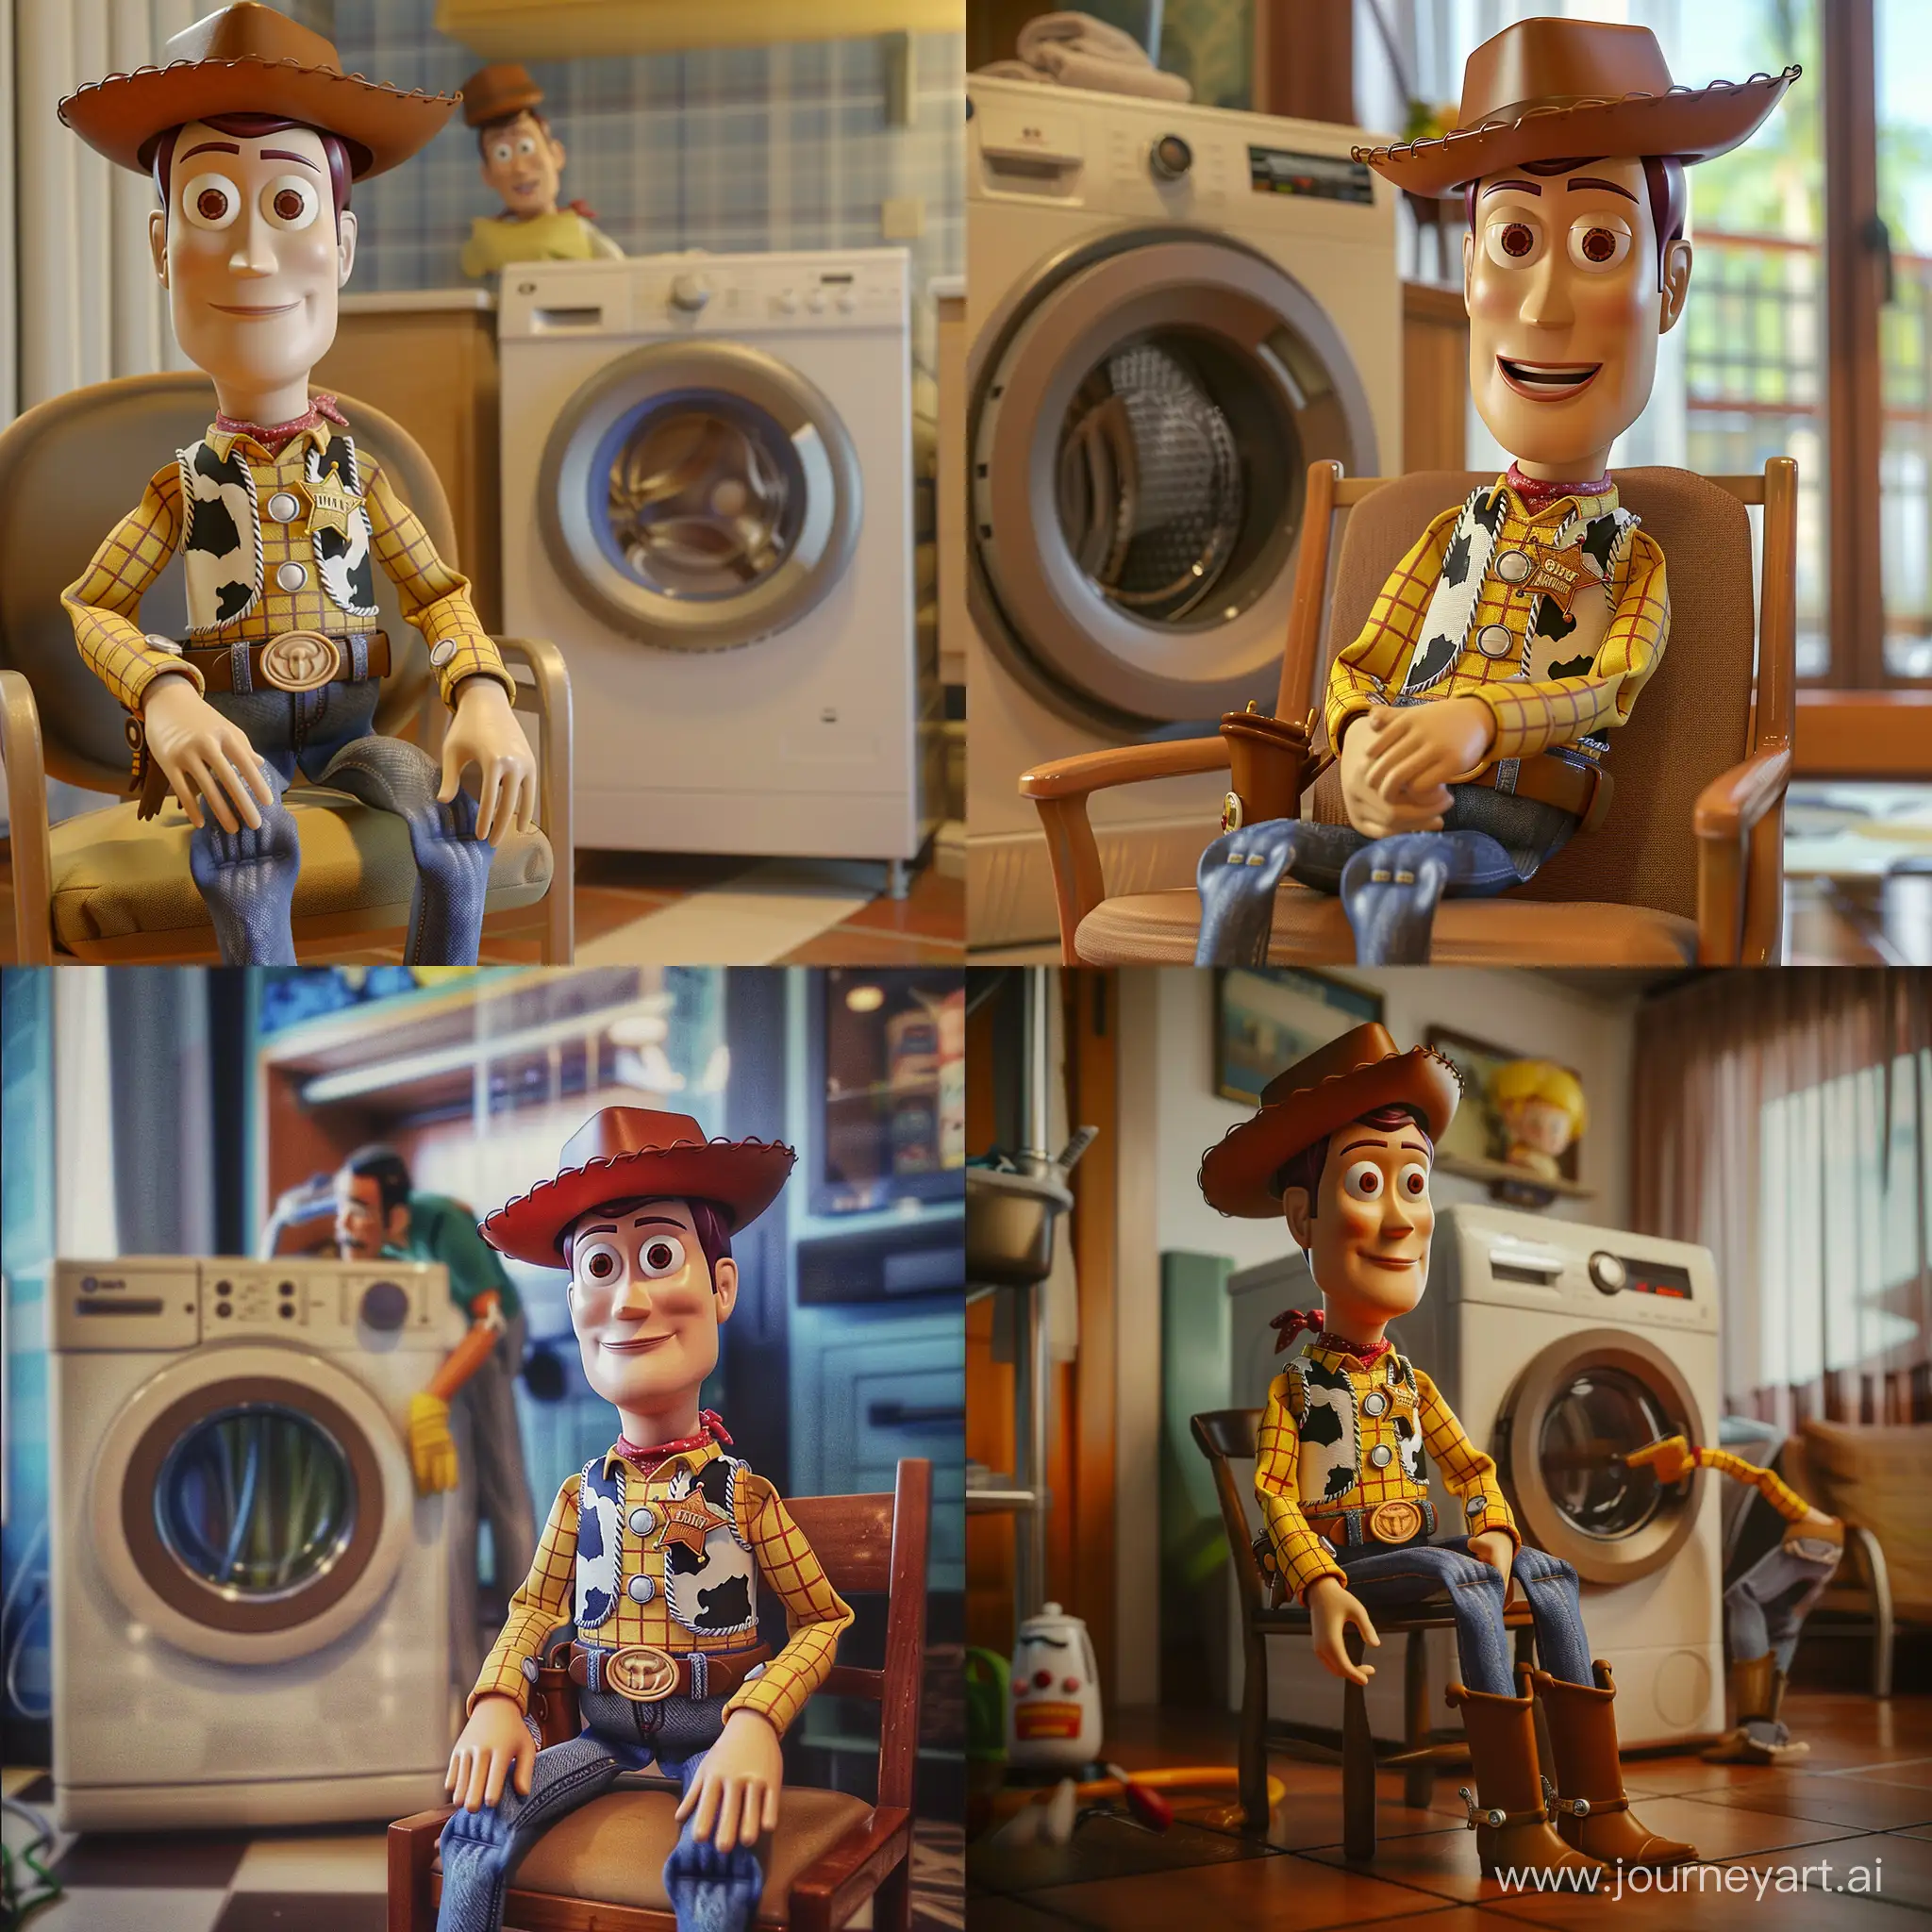 Woody toy story sitting on a chair waiting for the repairman of his washing machine to finish his work, looking at the camera and smiling. Behind him is an image of a hotel room, high quality, super real, with calm colors